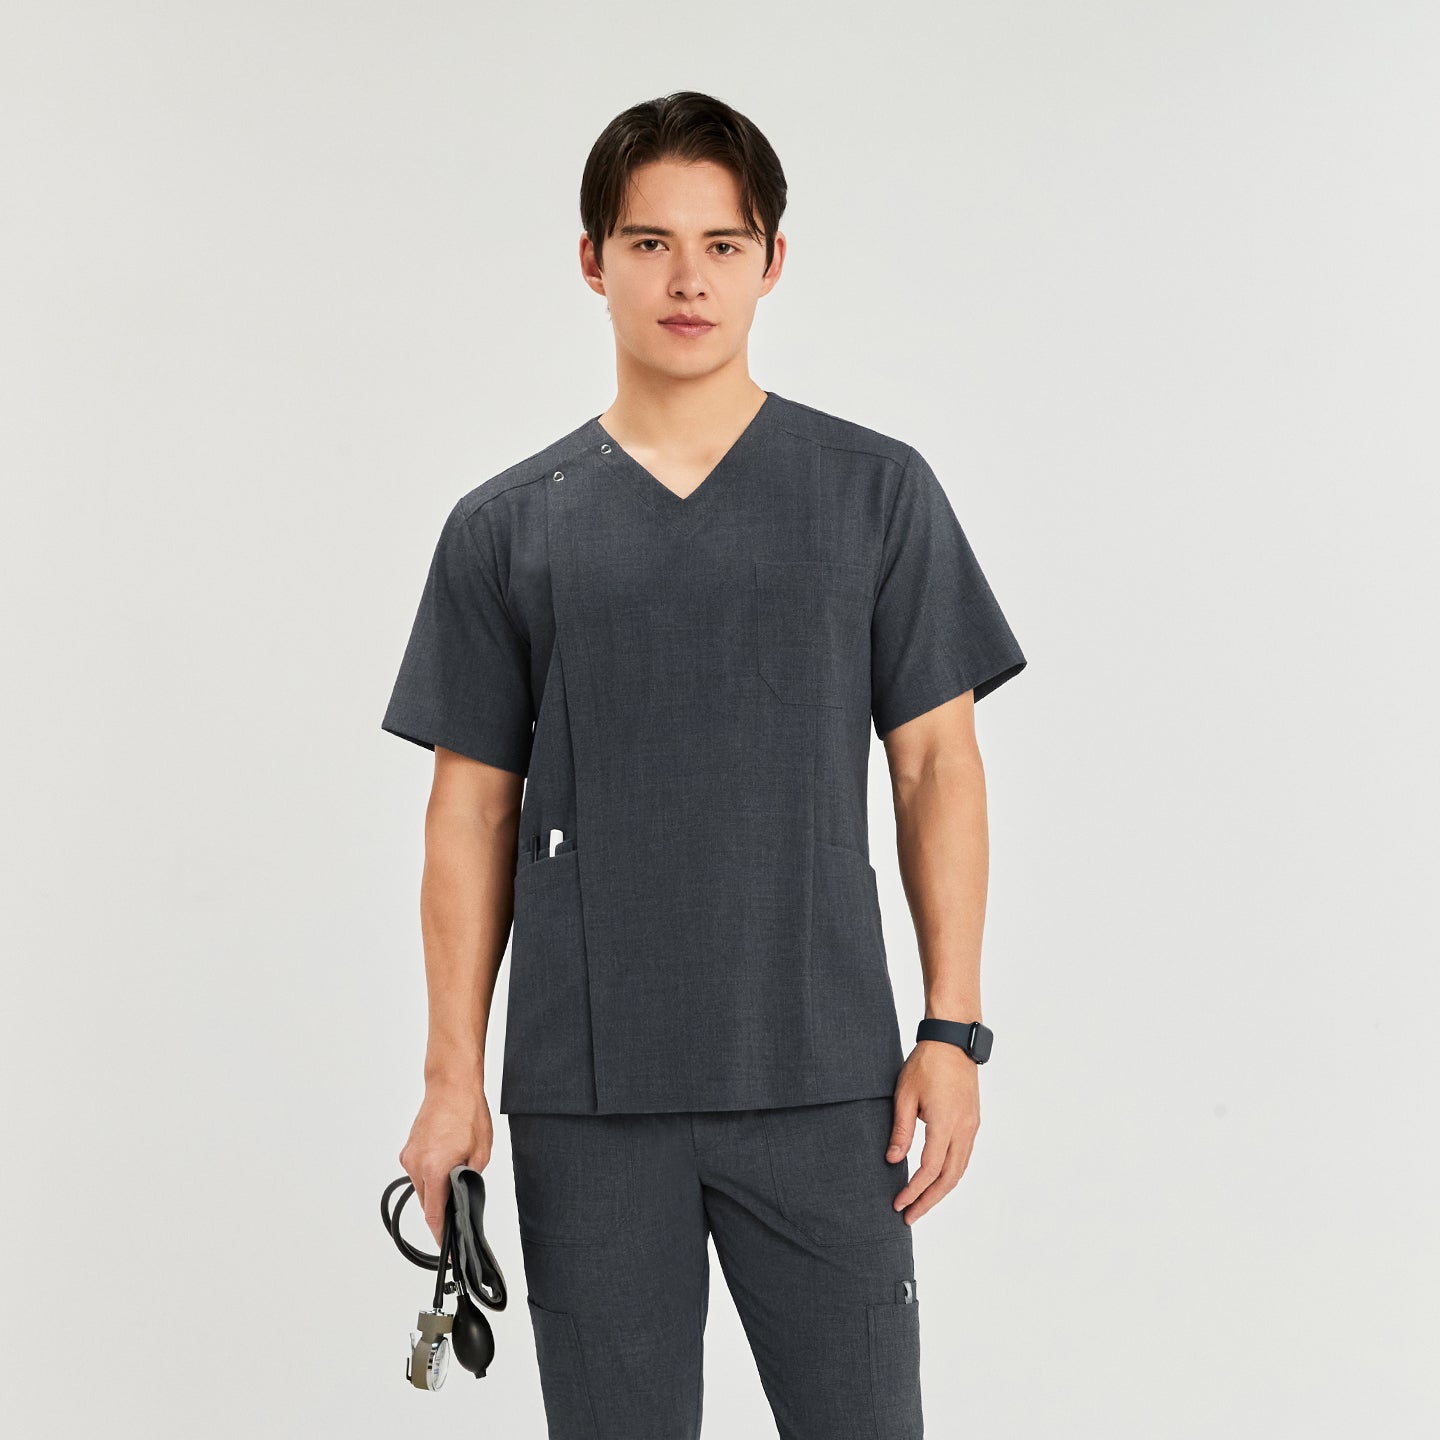 Man in a front zipper scrub top with matching cargo pants, holding a blood pressure monitor,Charcoal Gray